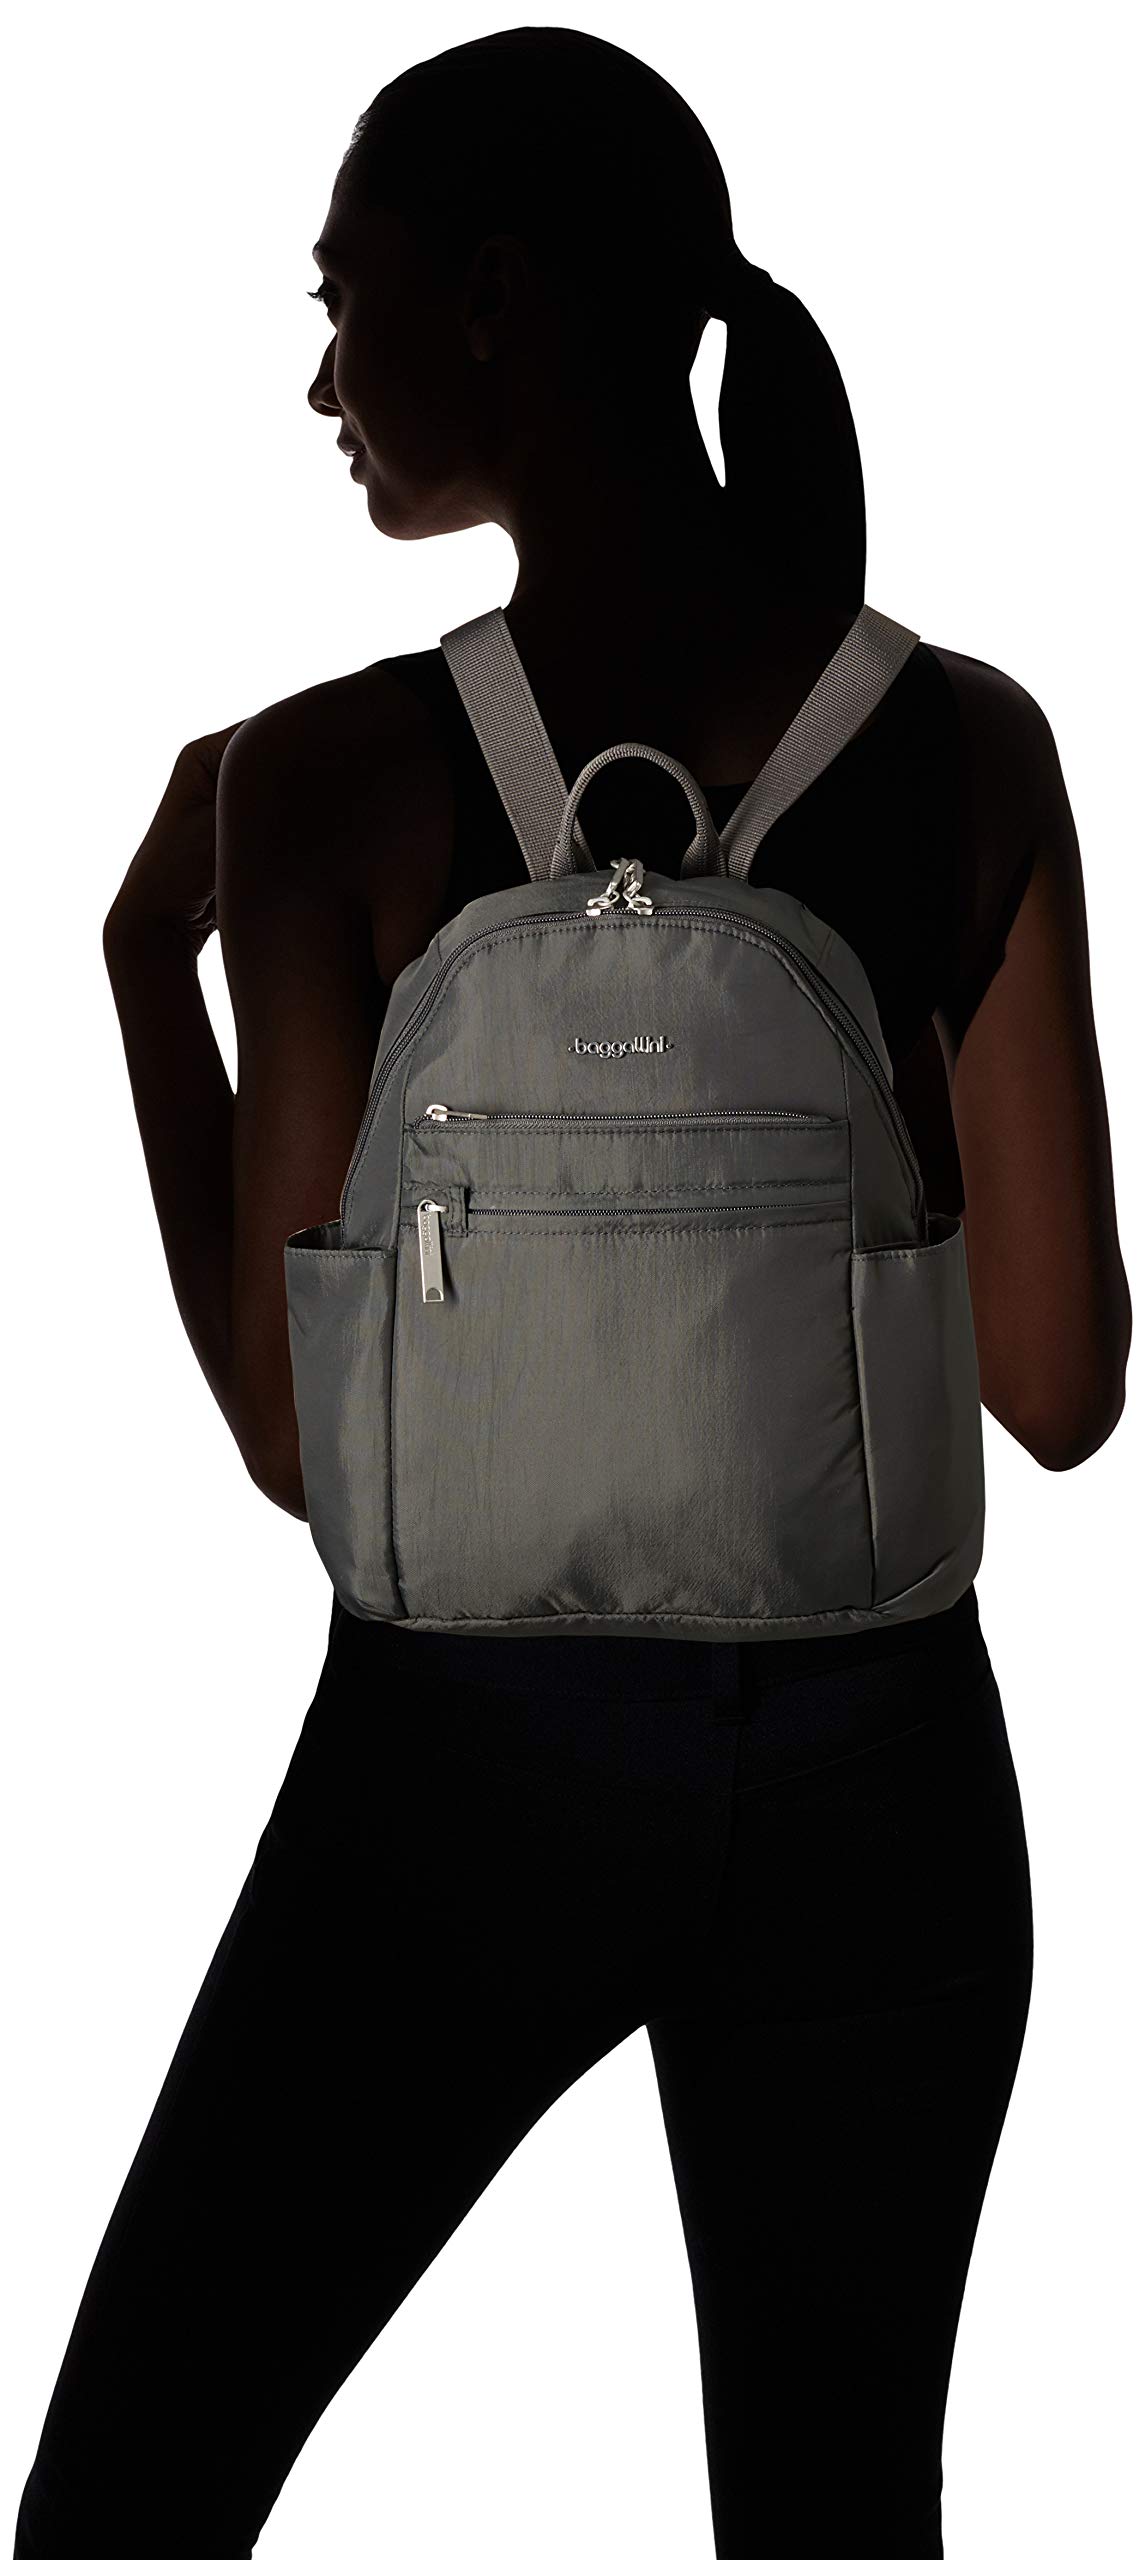 Baggallini womens Anti-theft Vacation Backpack, Charcoal, One Size US